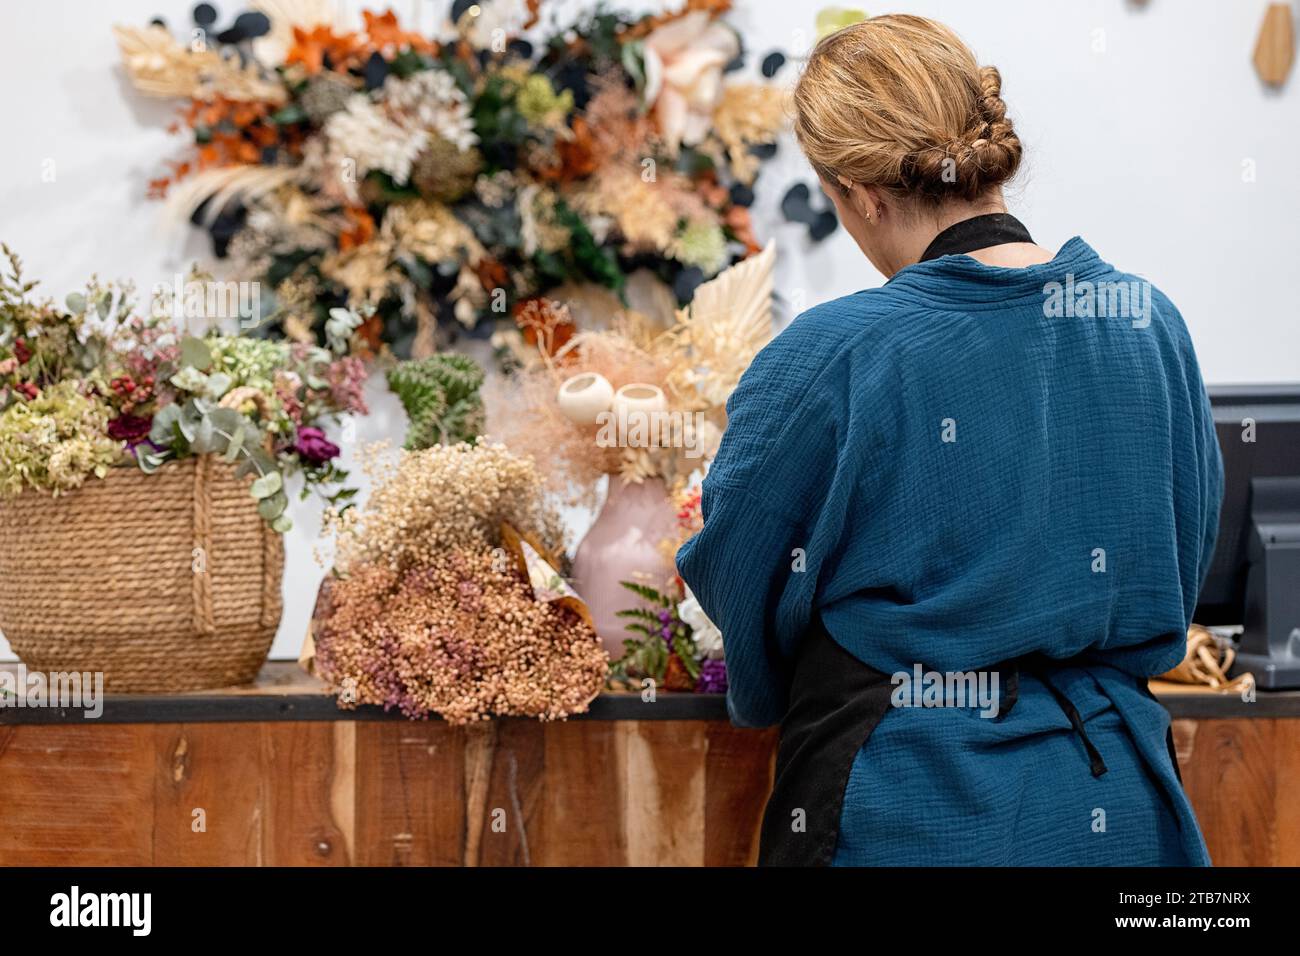 Back view of unrecognizable skilled florist is carefully arranging a selection of colorful dried flowers workshop Stock Photo